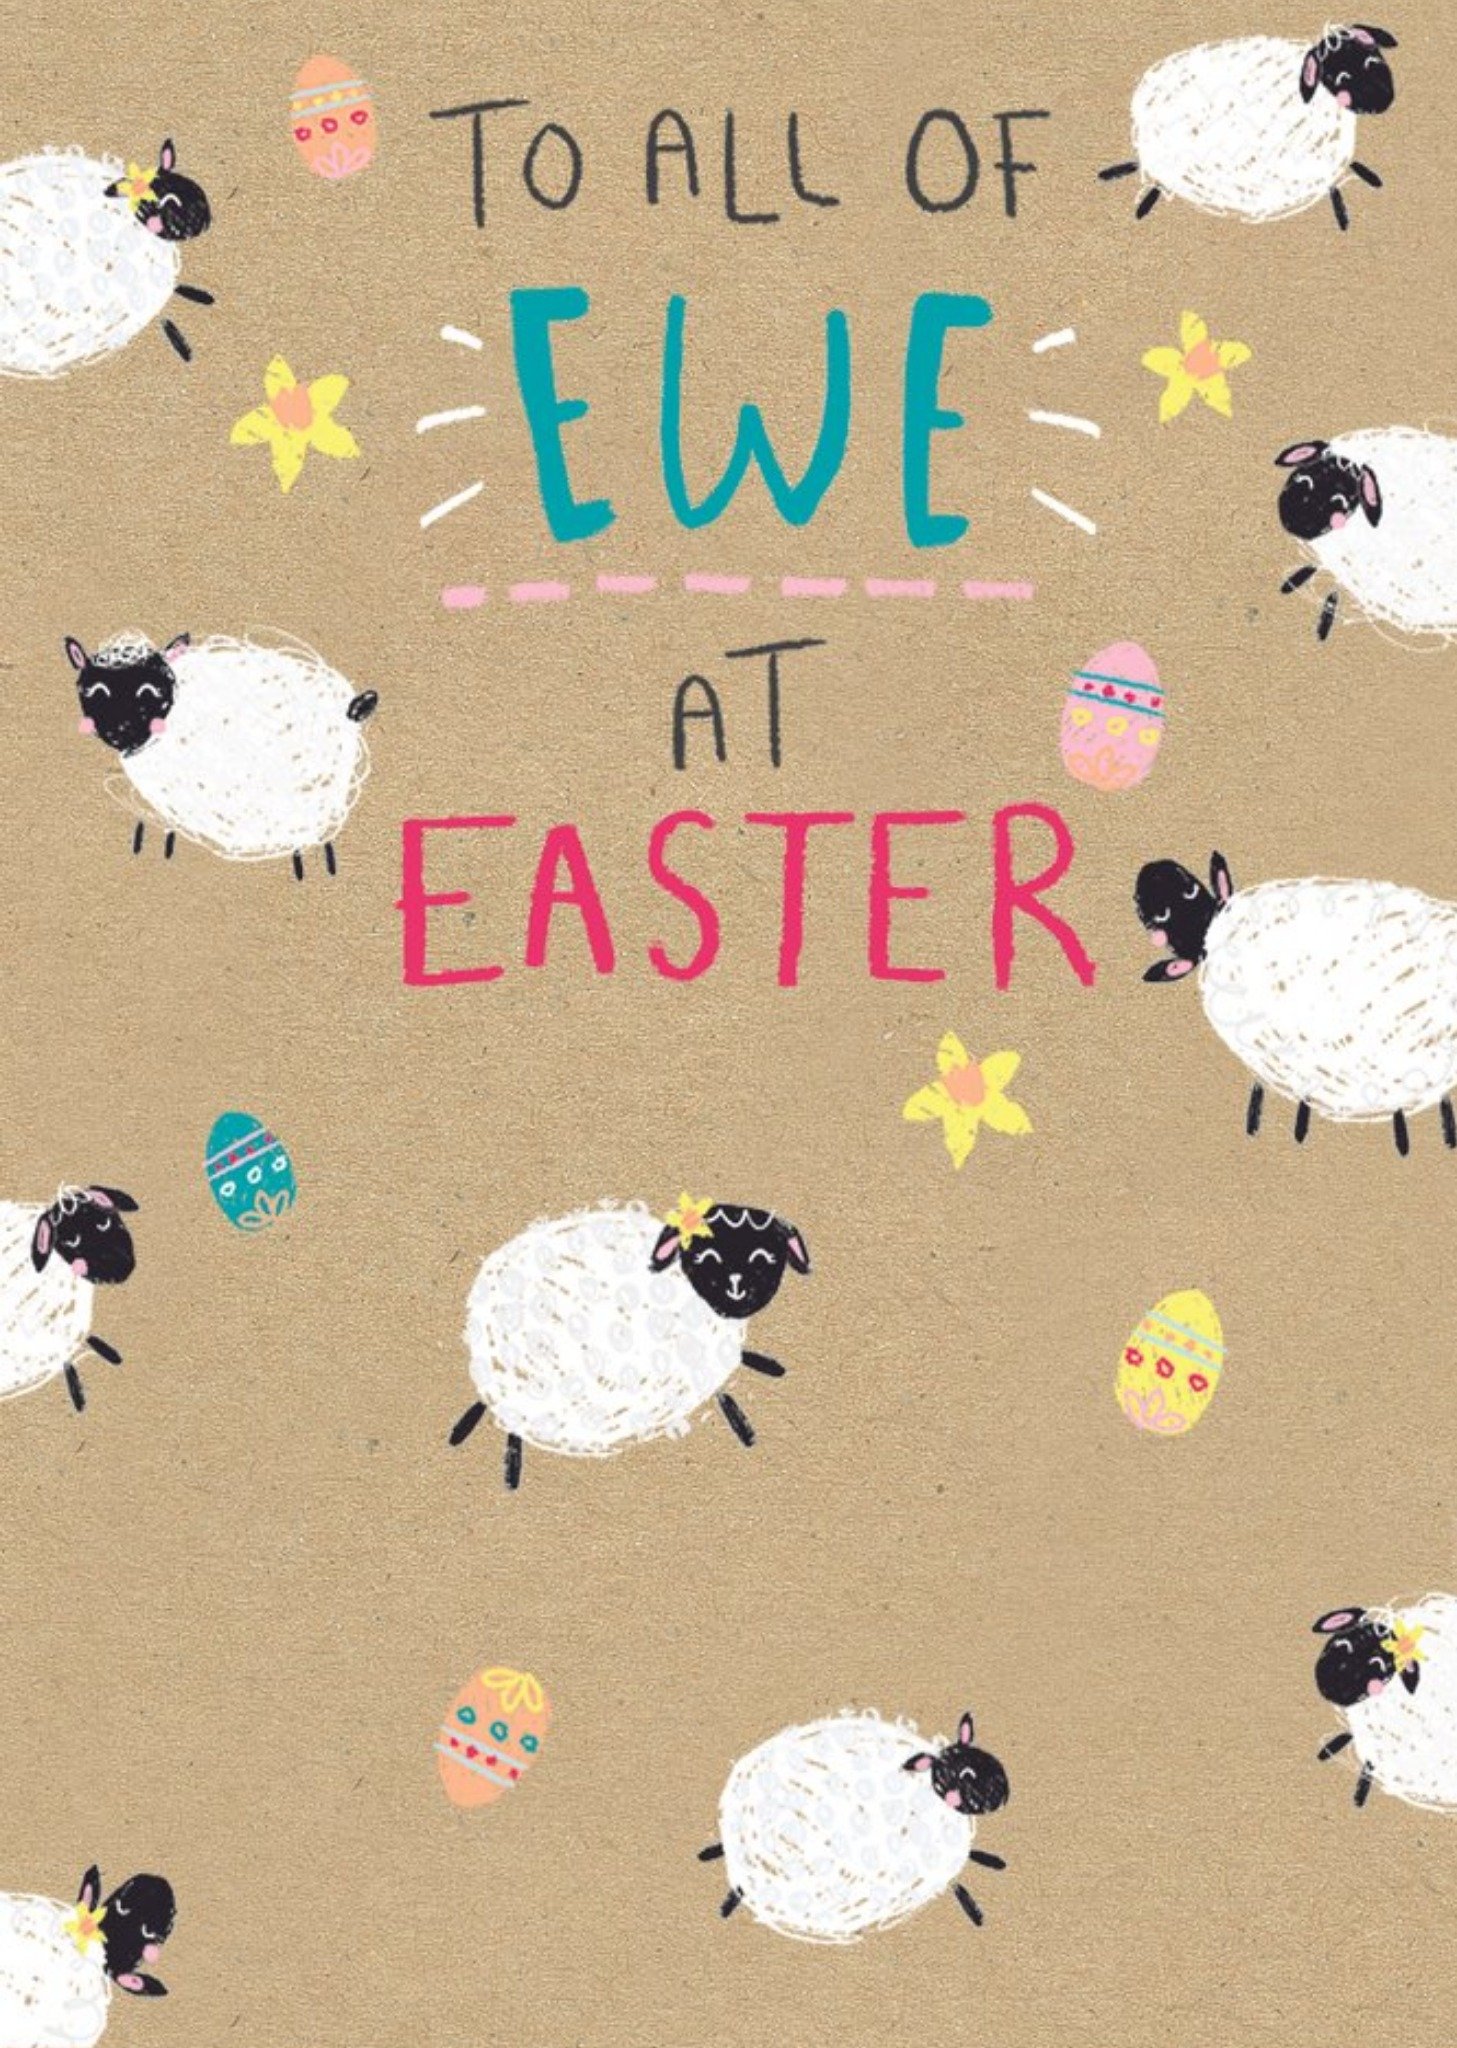 Moonpig Cute Illustrations Of Sheep And Easter Eggs On A Brown Paper Background Easter Card, Large